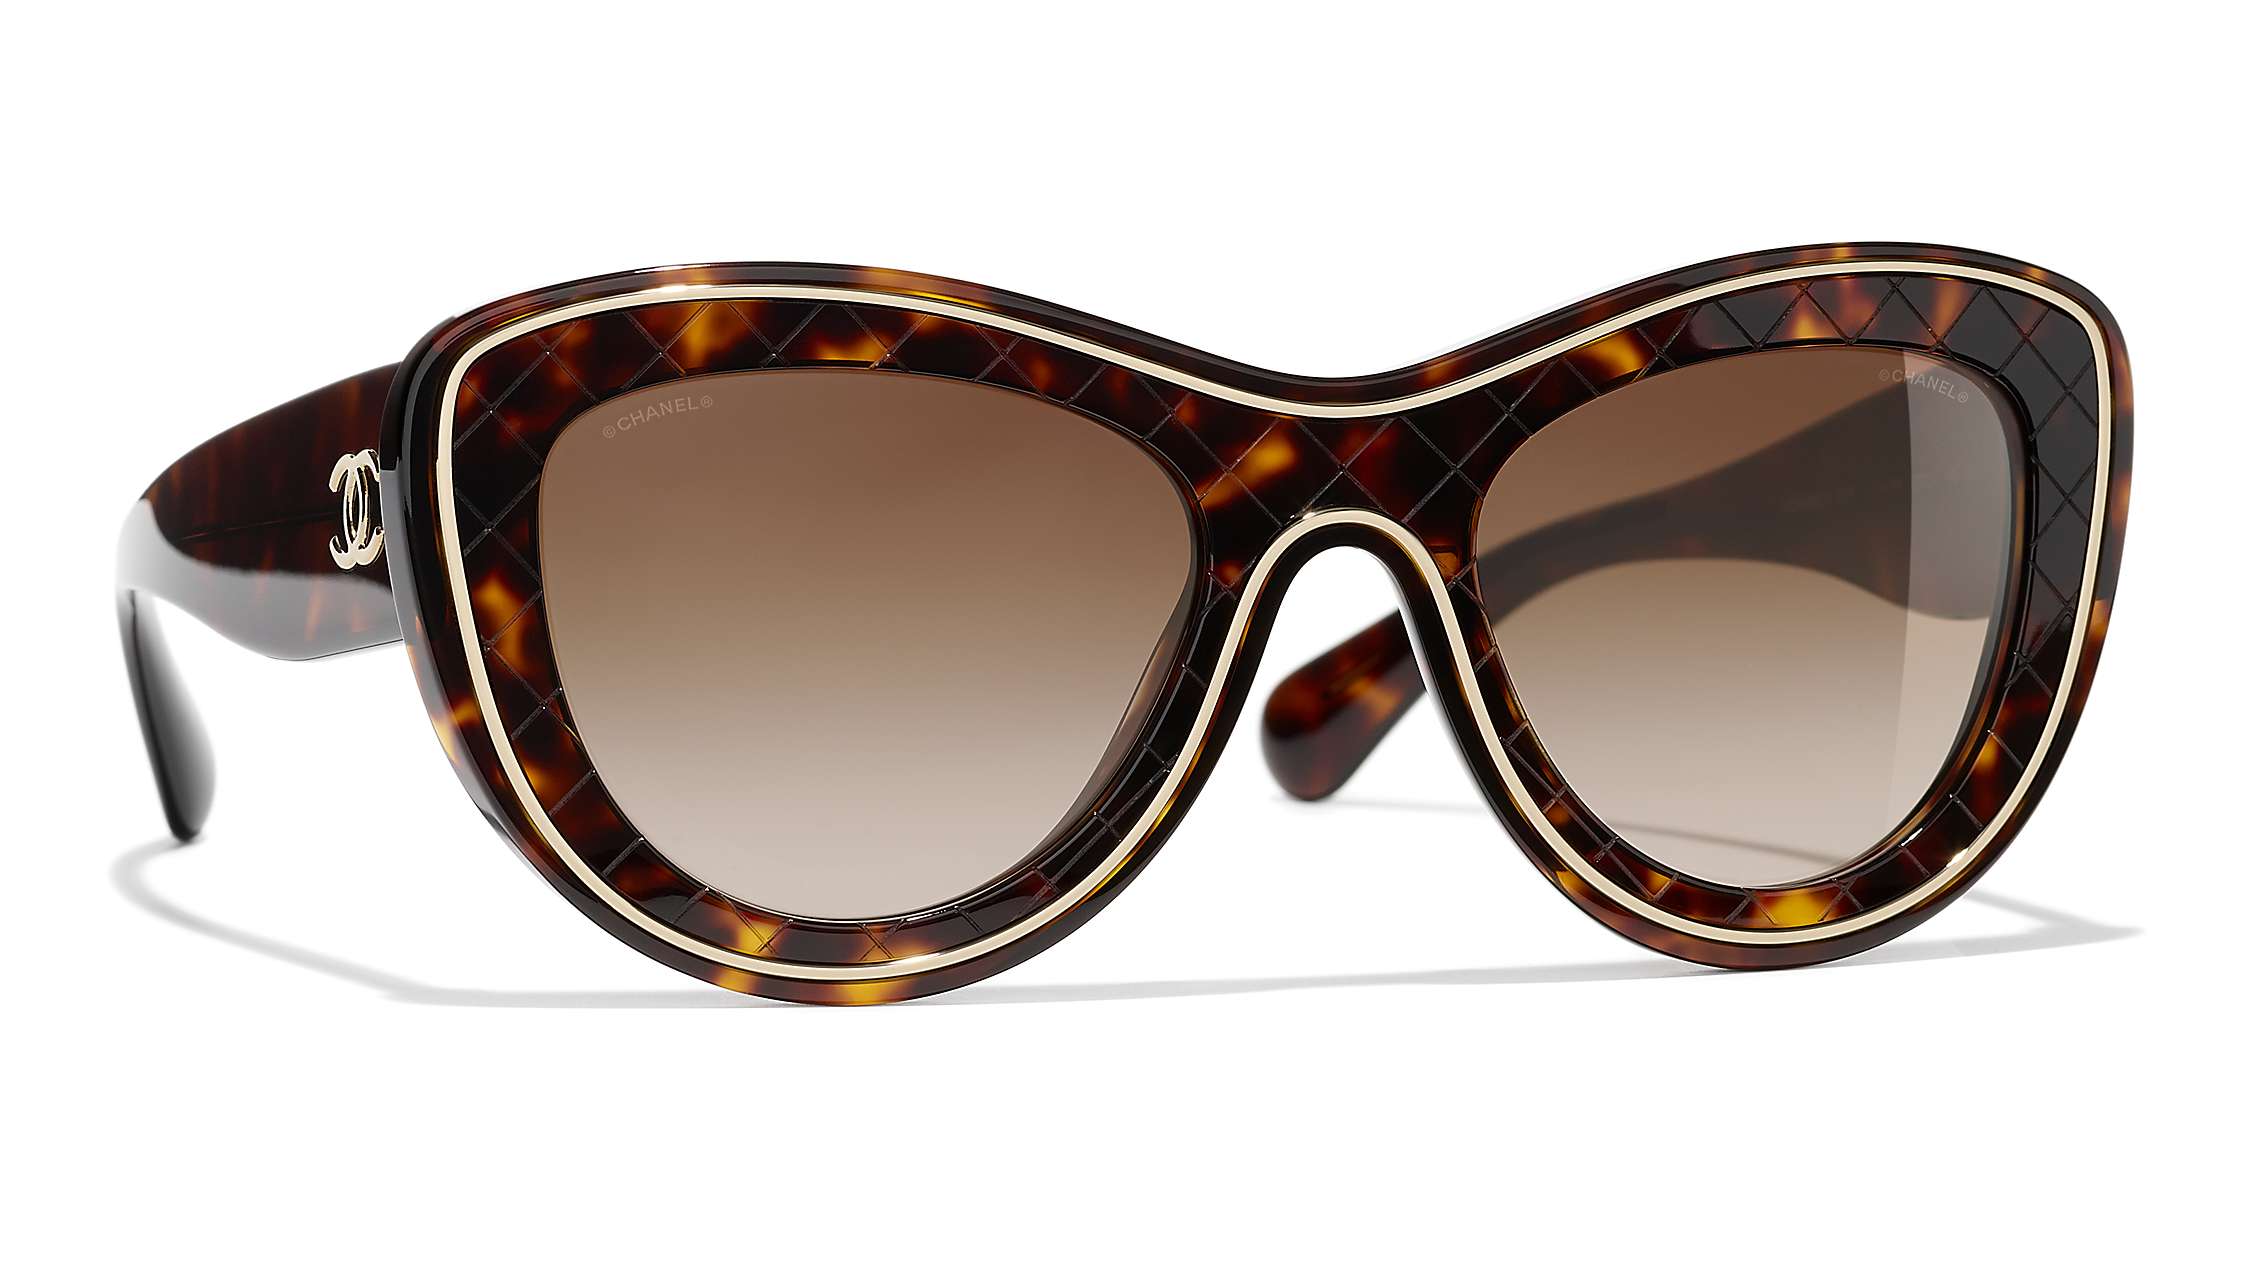 CHANEL Butterfly Sunglasses CH5397 Havana/Brown Gradient at John Lewis